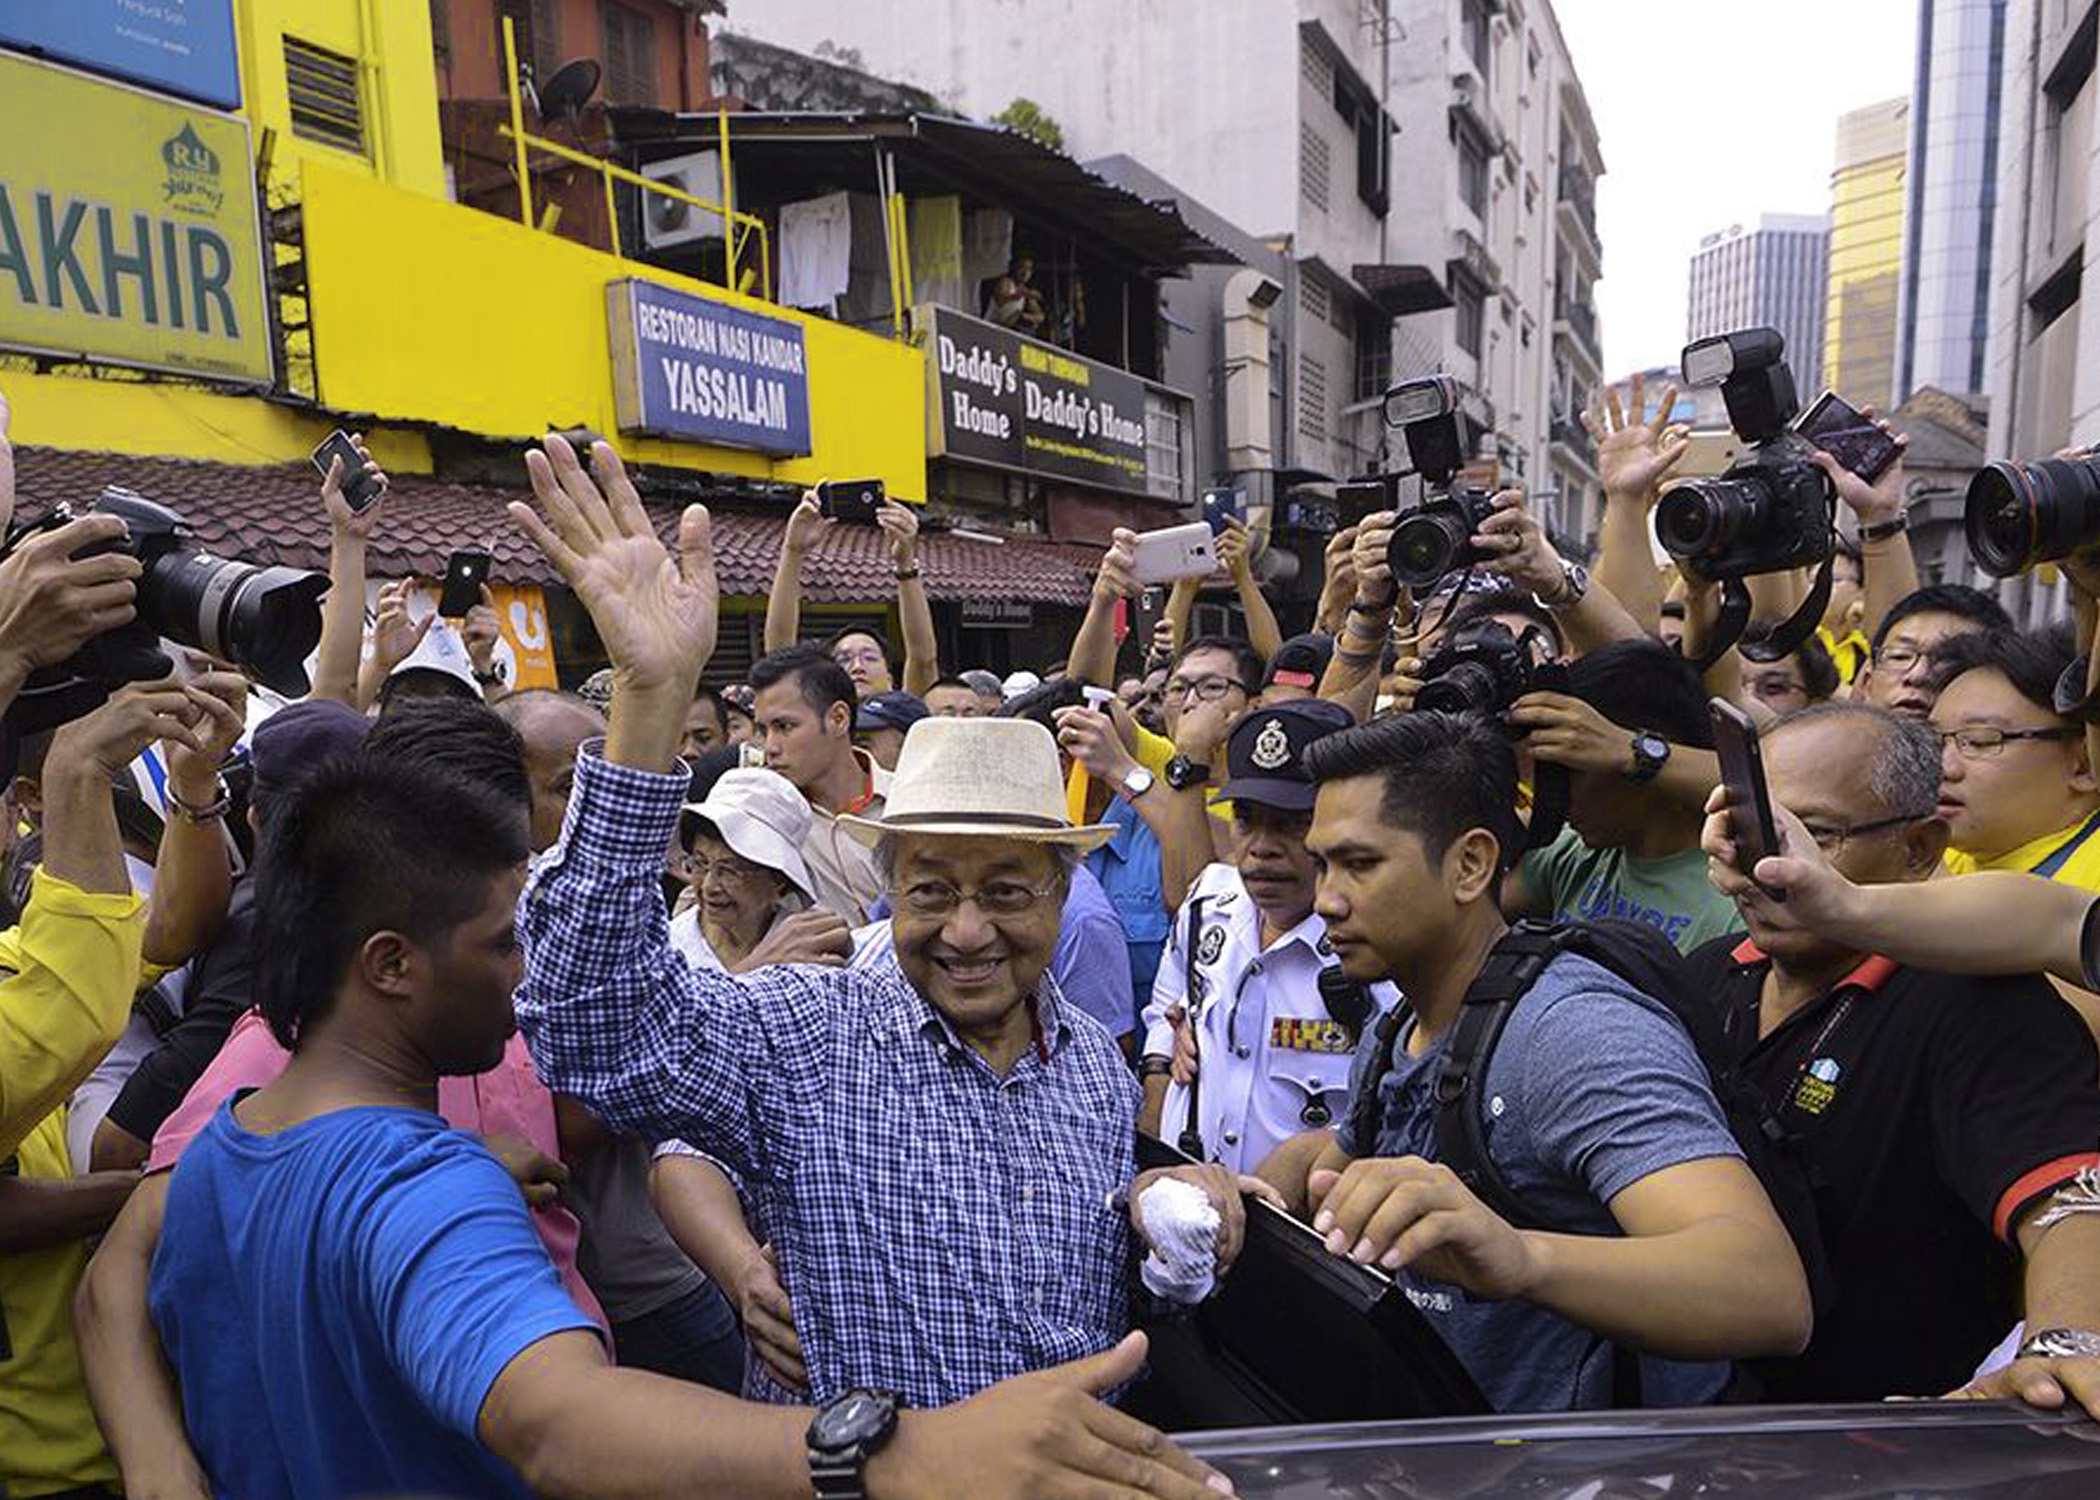 Former Malaysian premier Mahathir Mohamad, joining anti-government protesters for a second day on Sunday, called for a "people's power" movement to topple Prime Minister Najib Razak over a financial scandal.